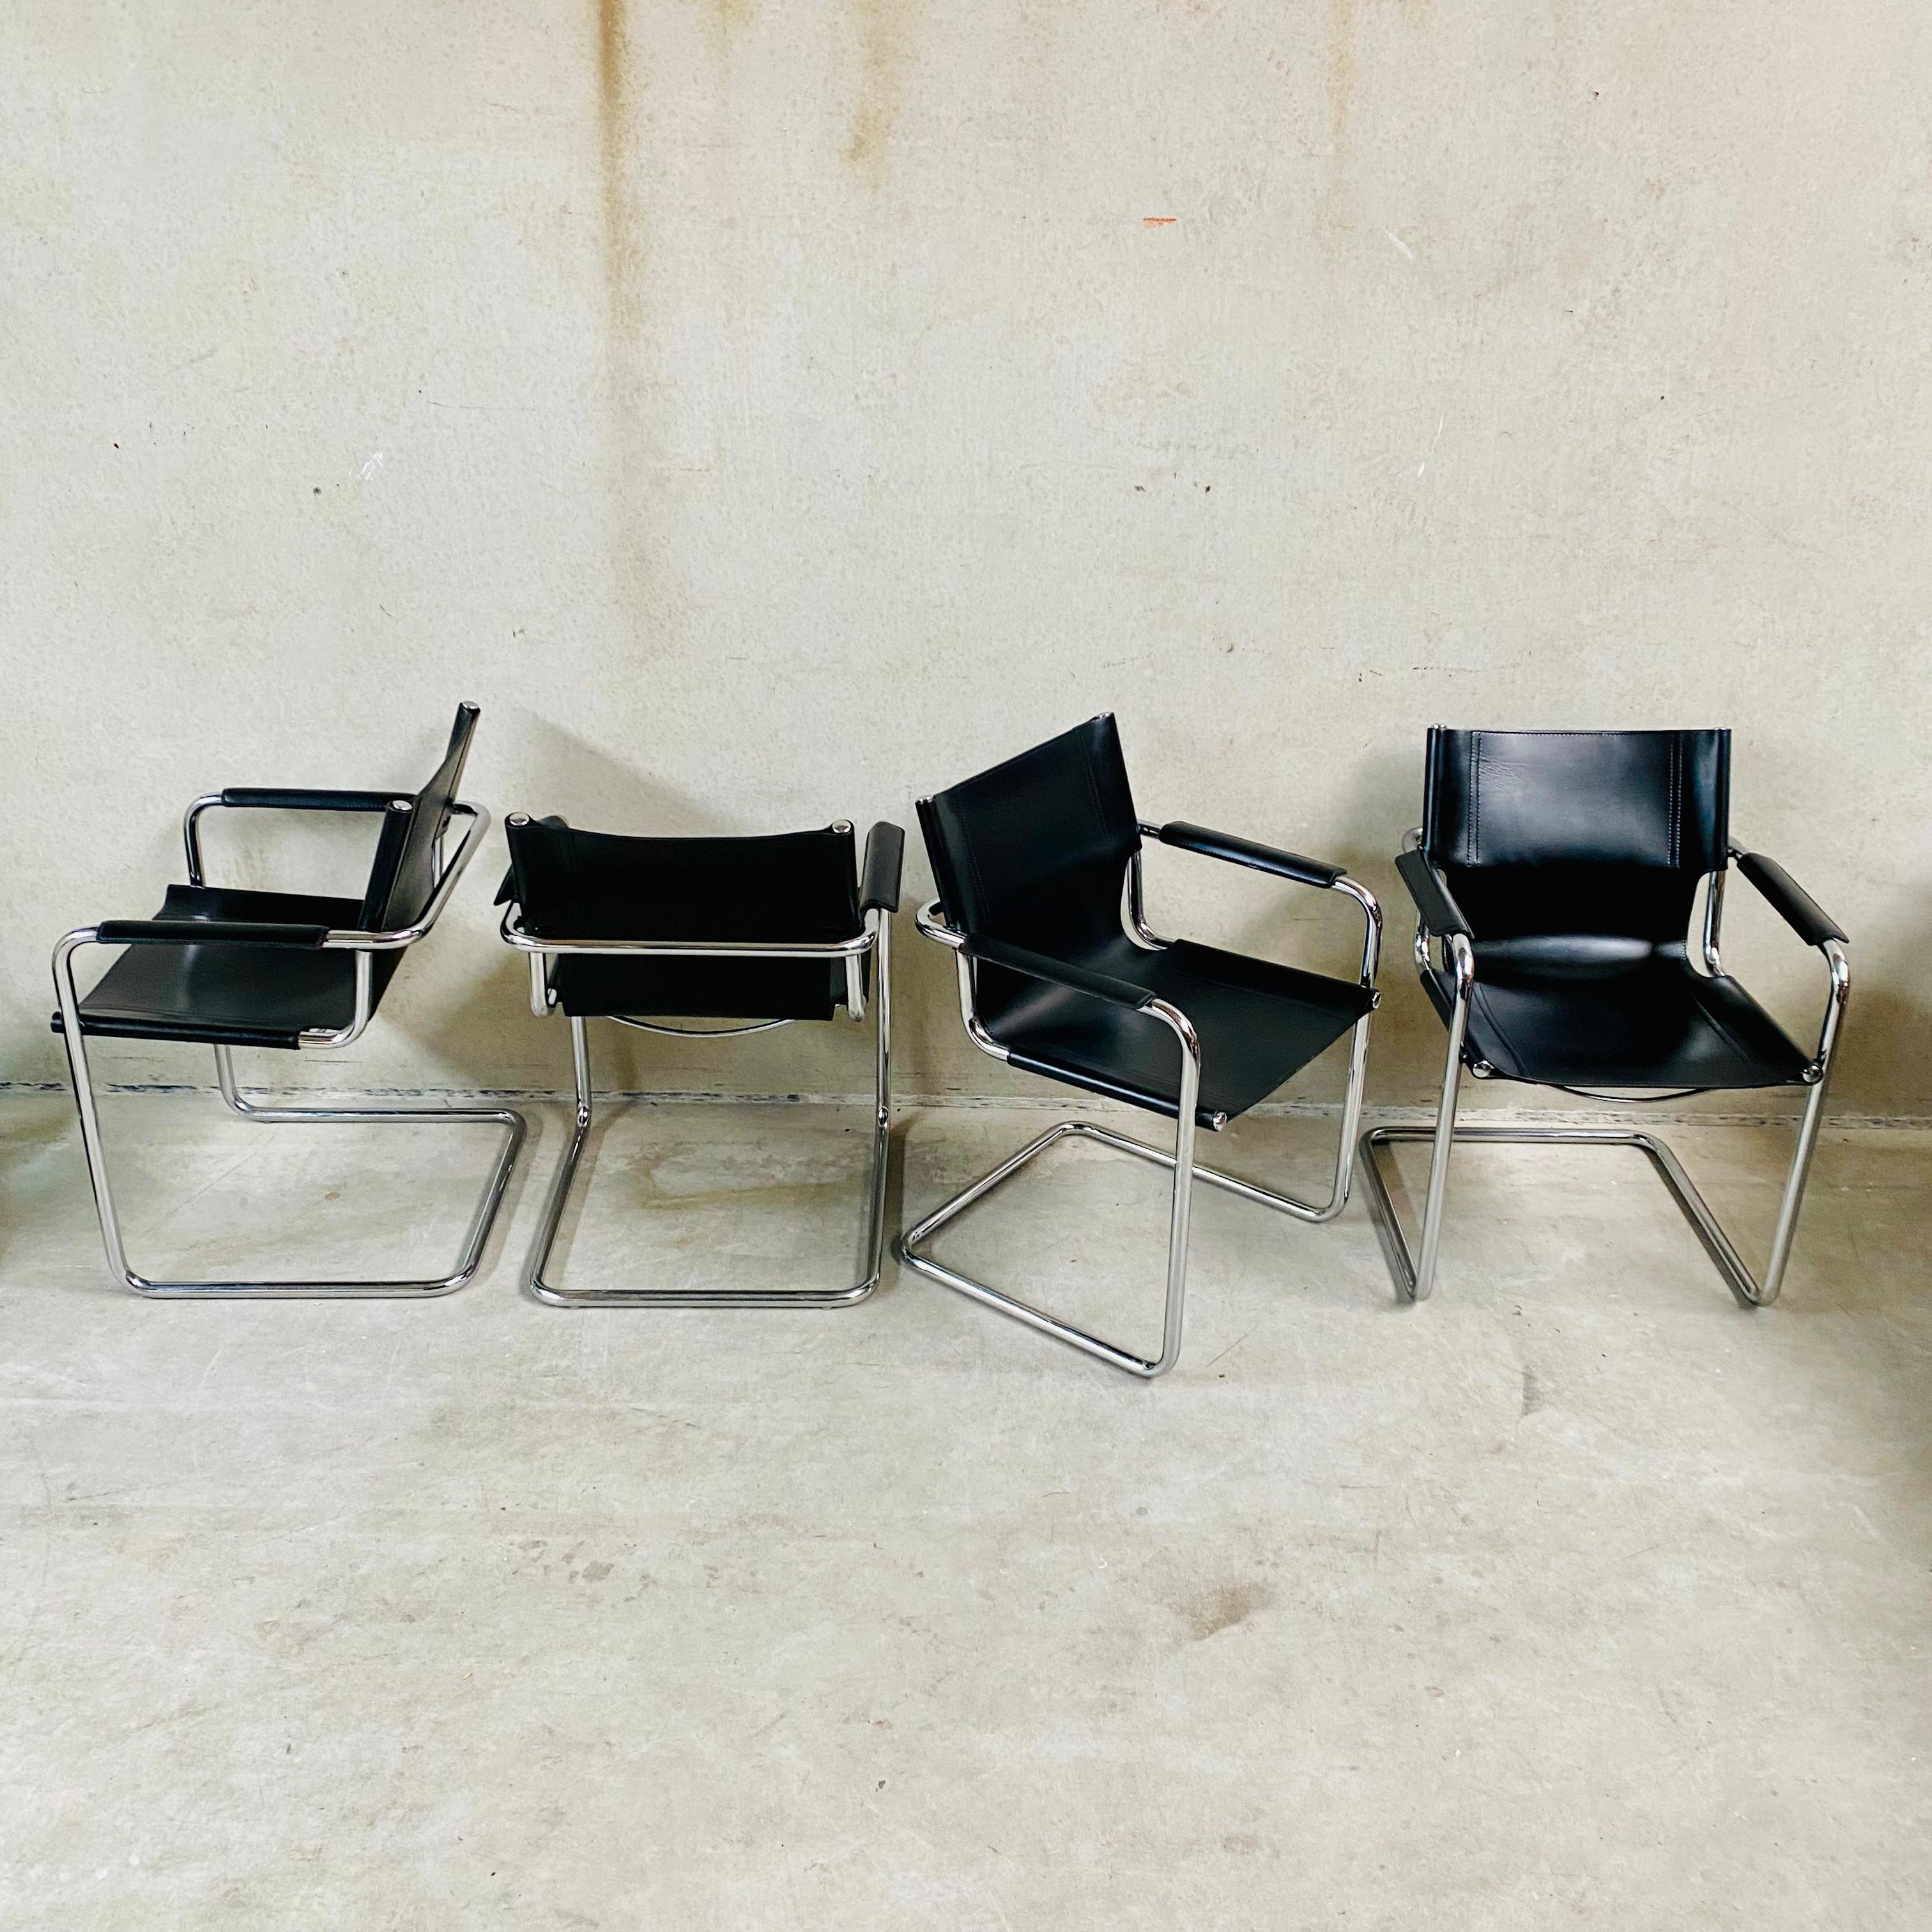 50 x Matteo Grassi Leather Cantilever Dining Chairs by Mart Stam, Italy 1970 For Sale 3